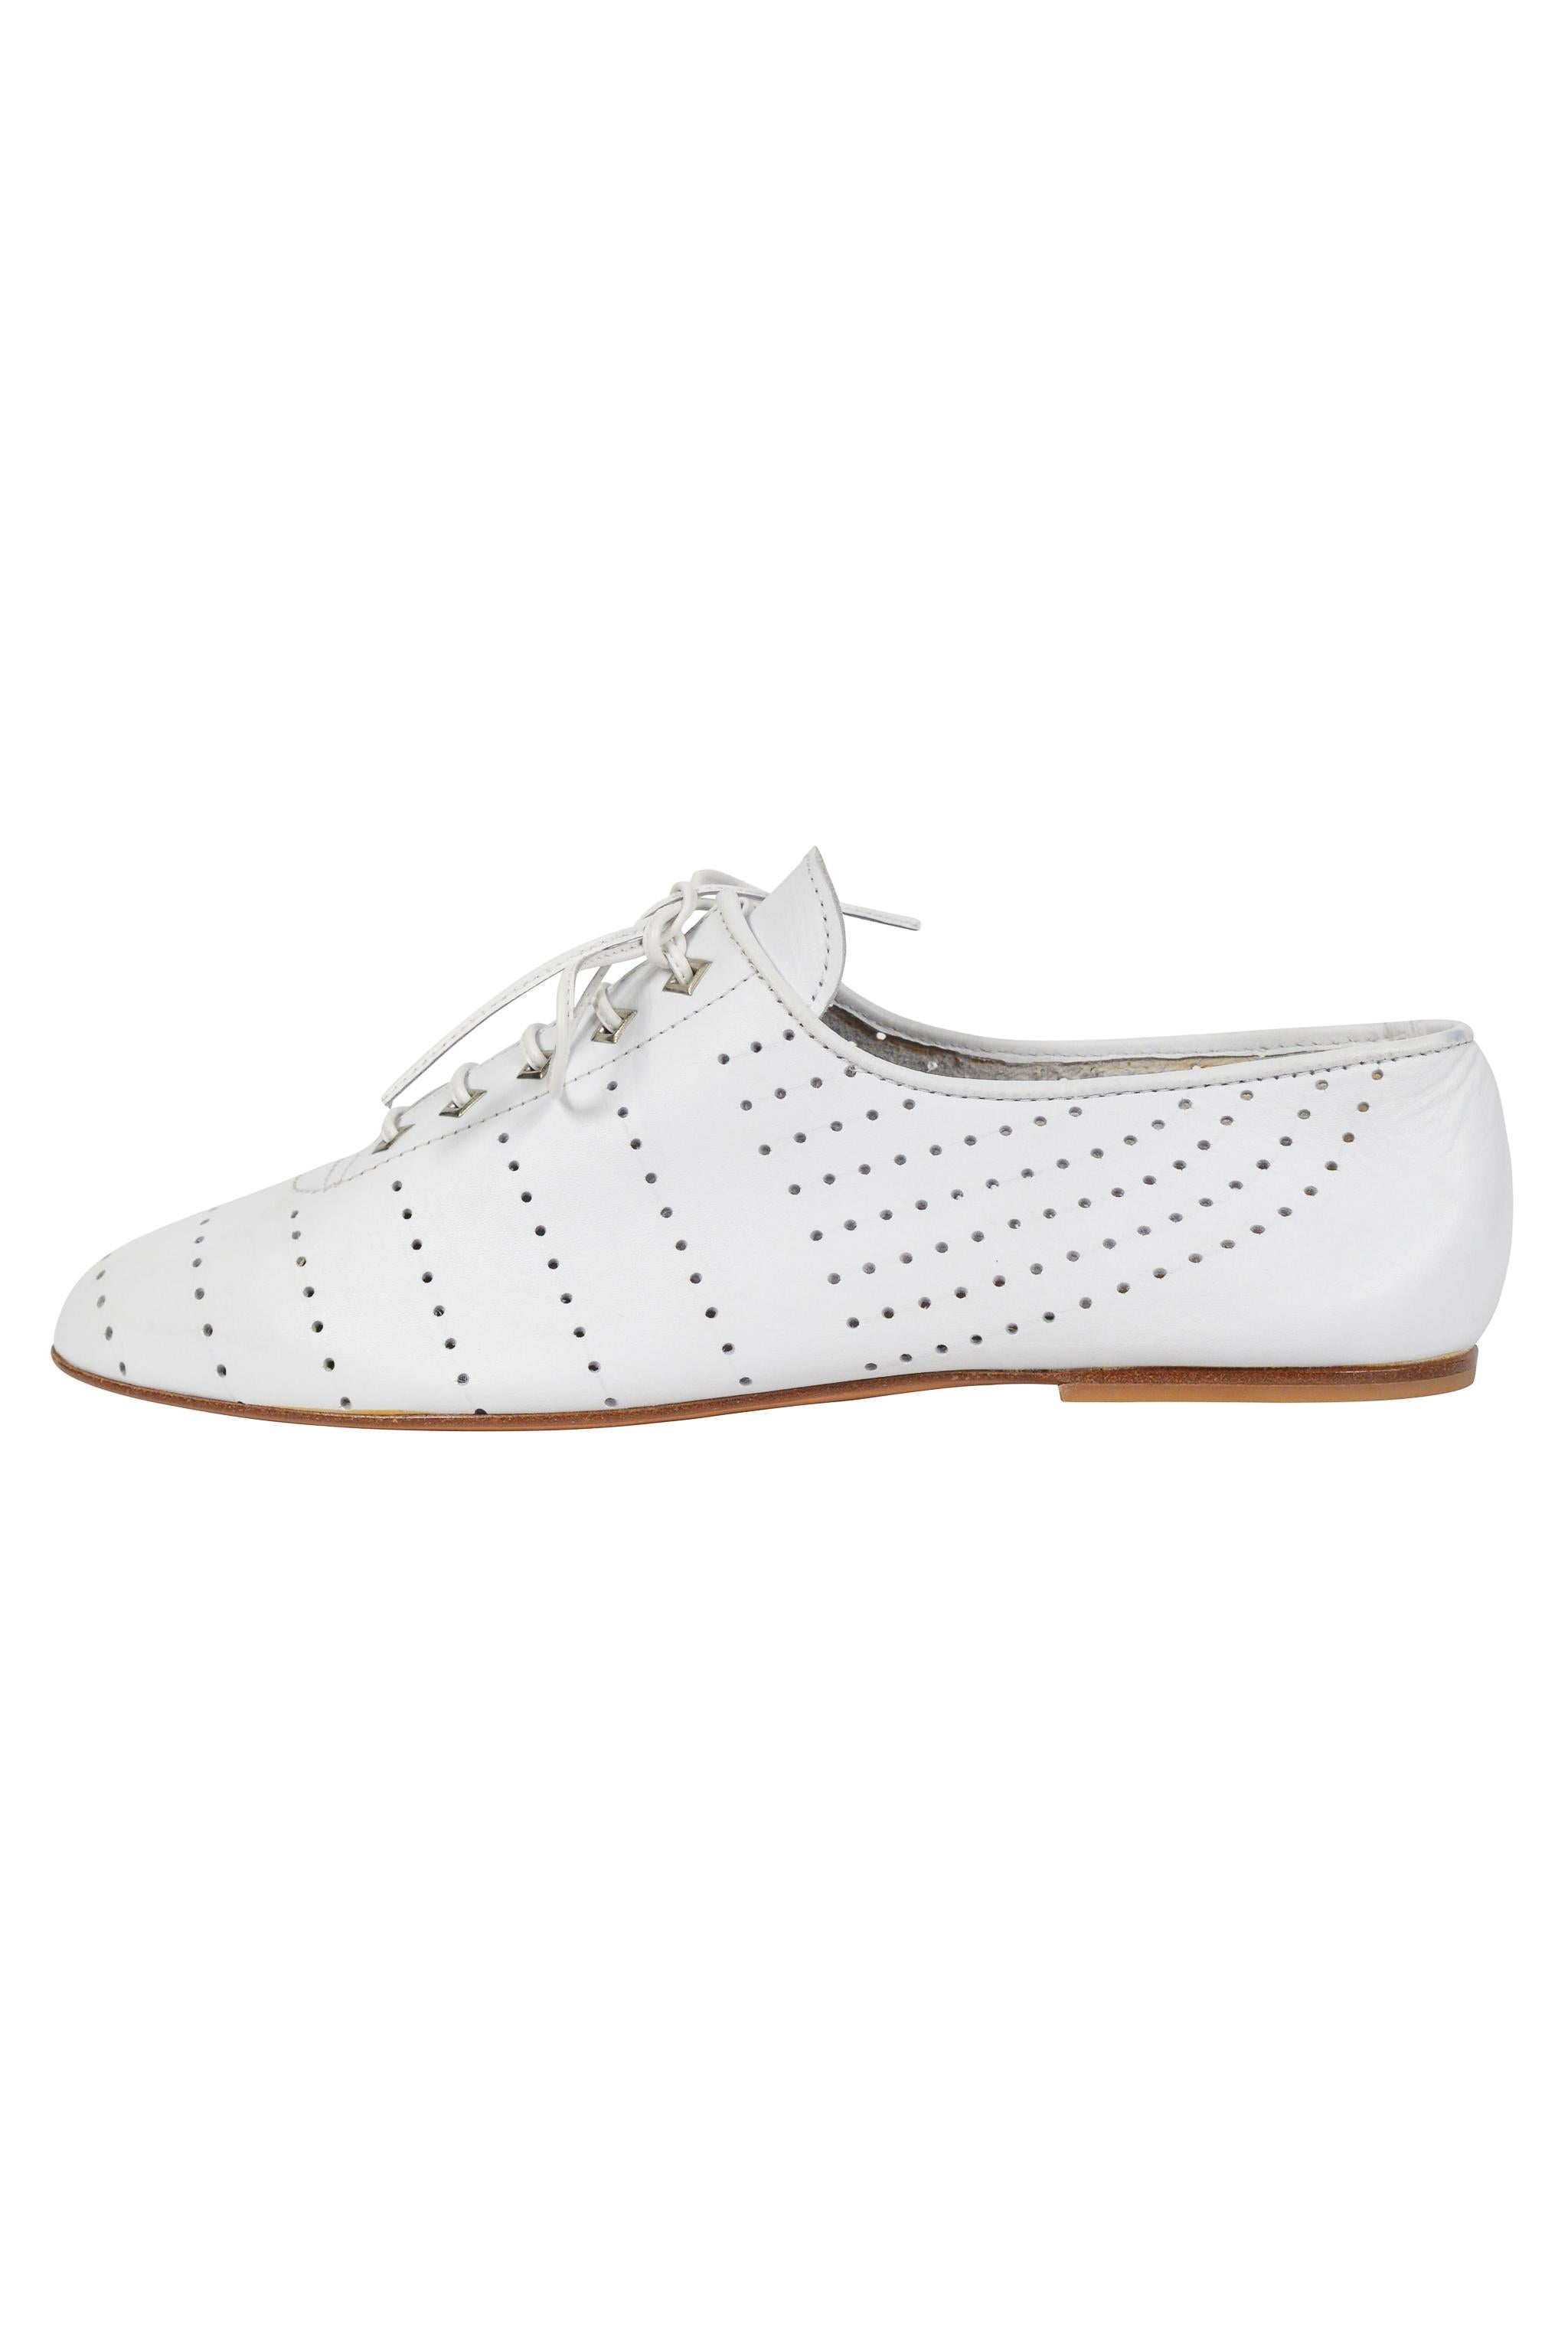 Resurrection Vintage is excited to offer a pair of vintage Azzedine Alaia white leather perforated shoes featuring diamond metal grommets and leather laces. 

Azzedine Alaia Paris For Diego Della Valle
Size 38.5
Leather
Circa Late 1980s
Excellent